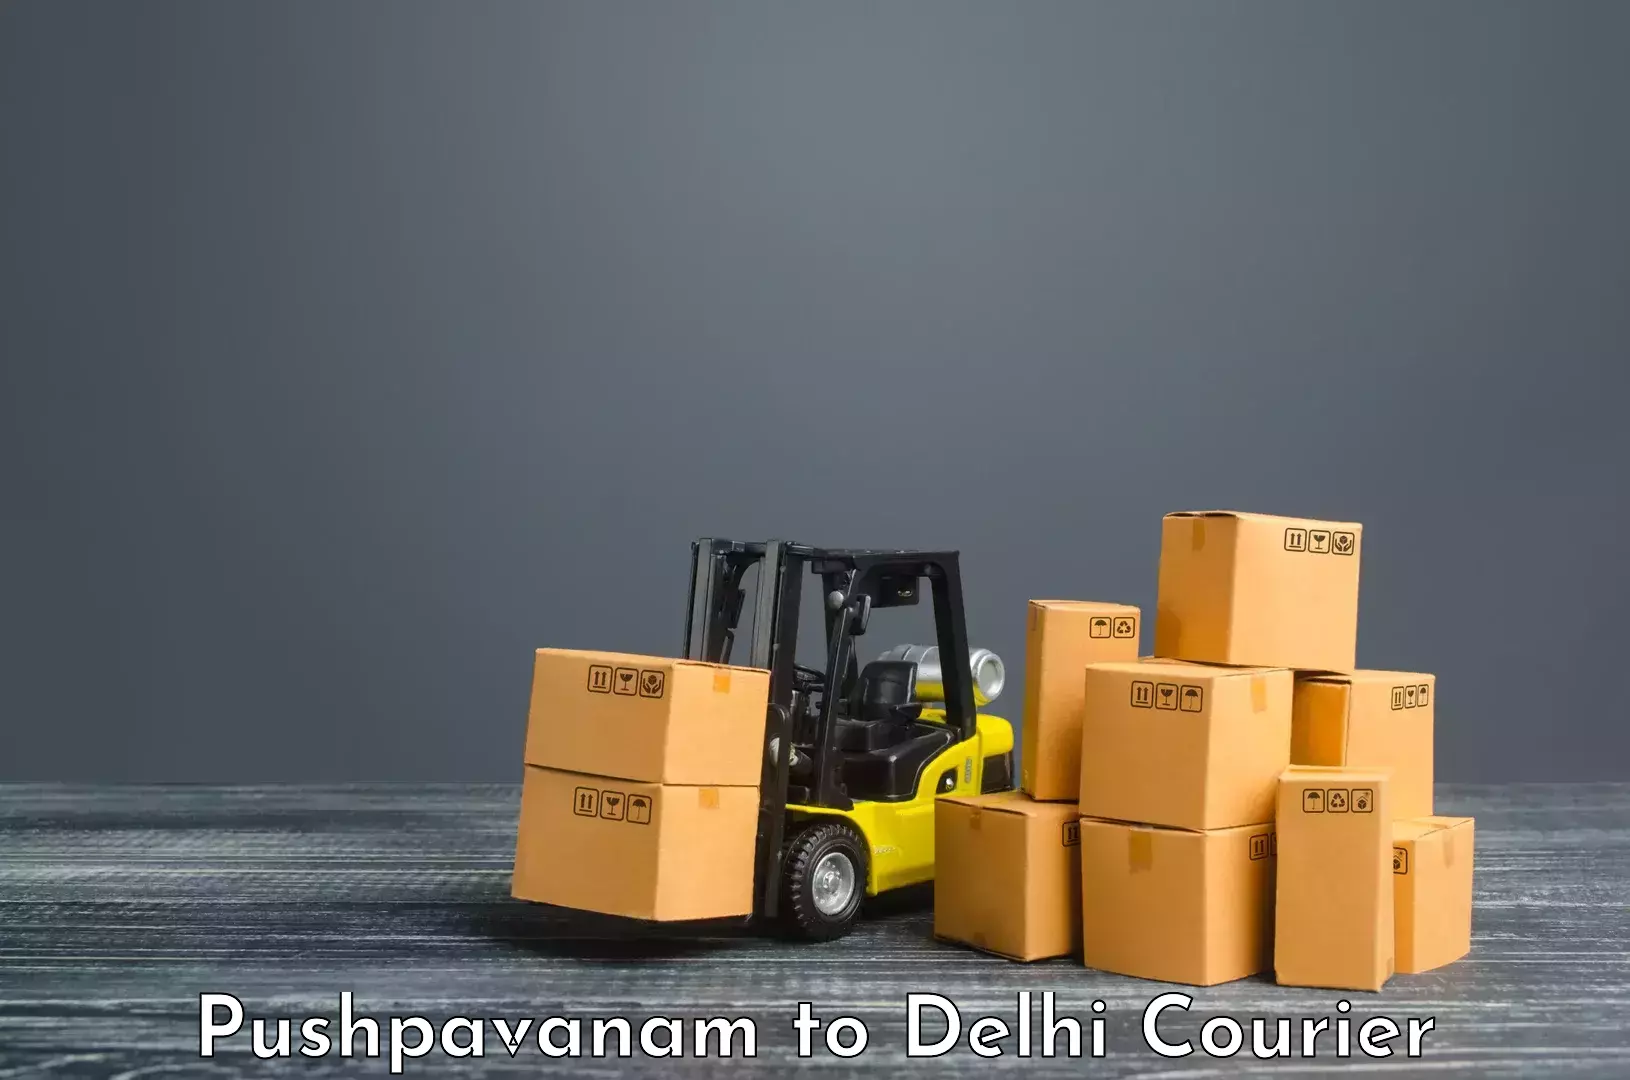 24/7 shipping services Pushpavanam to NCR